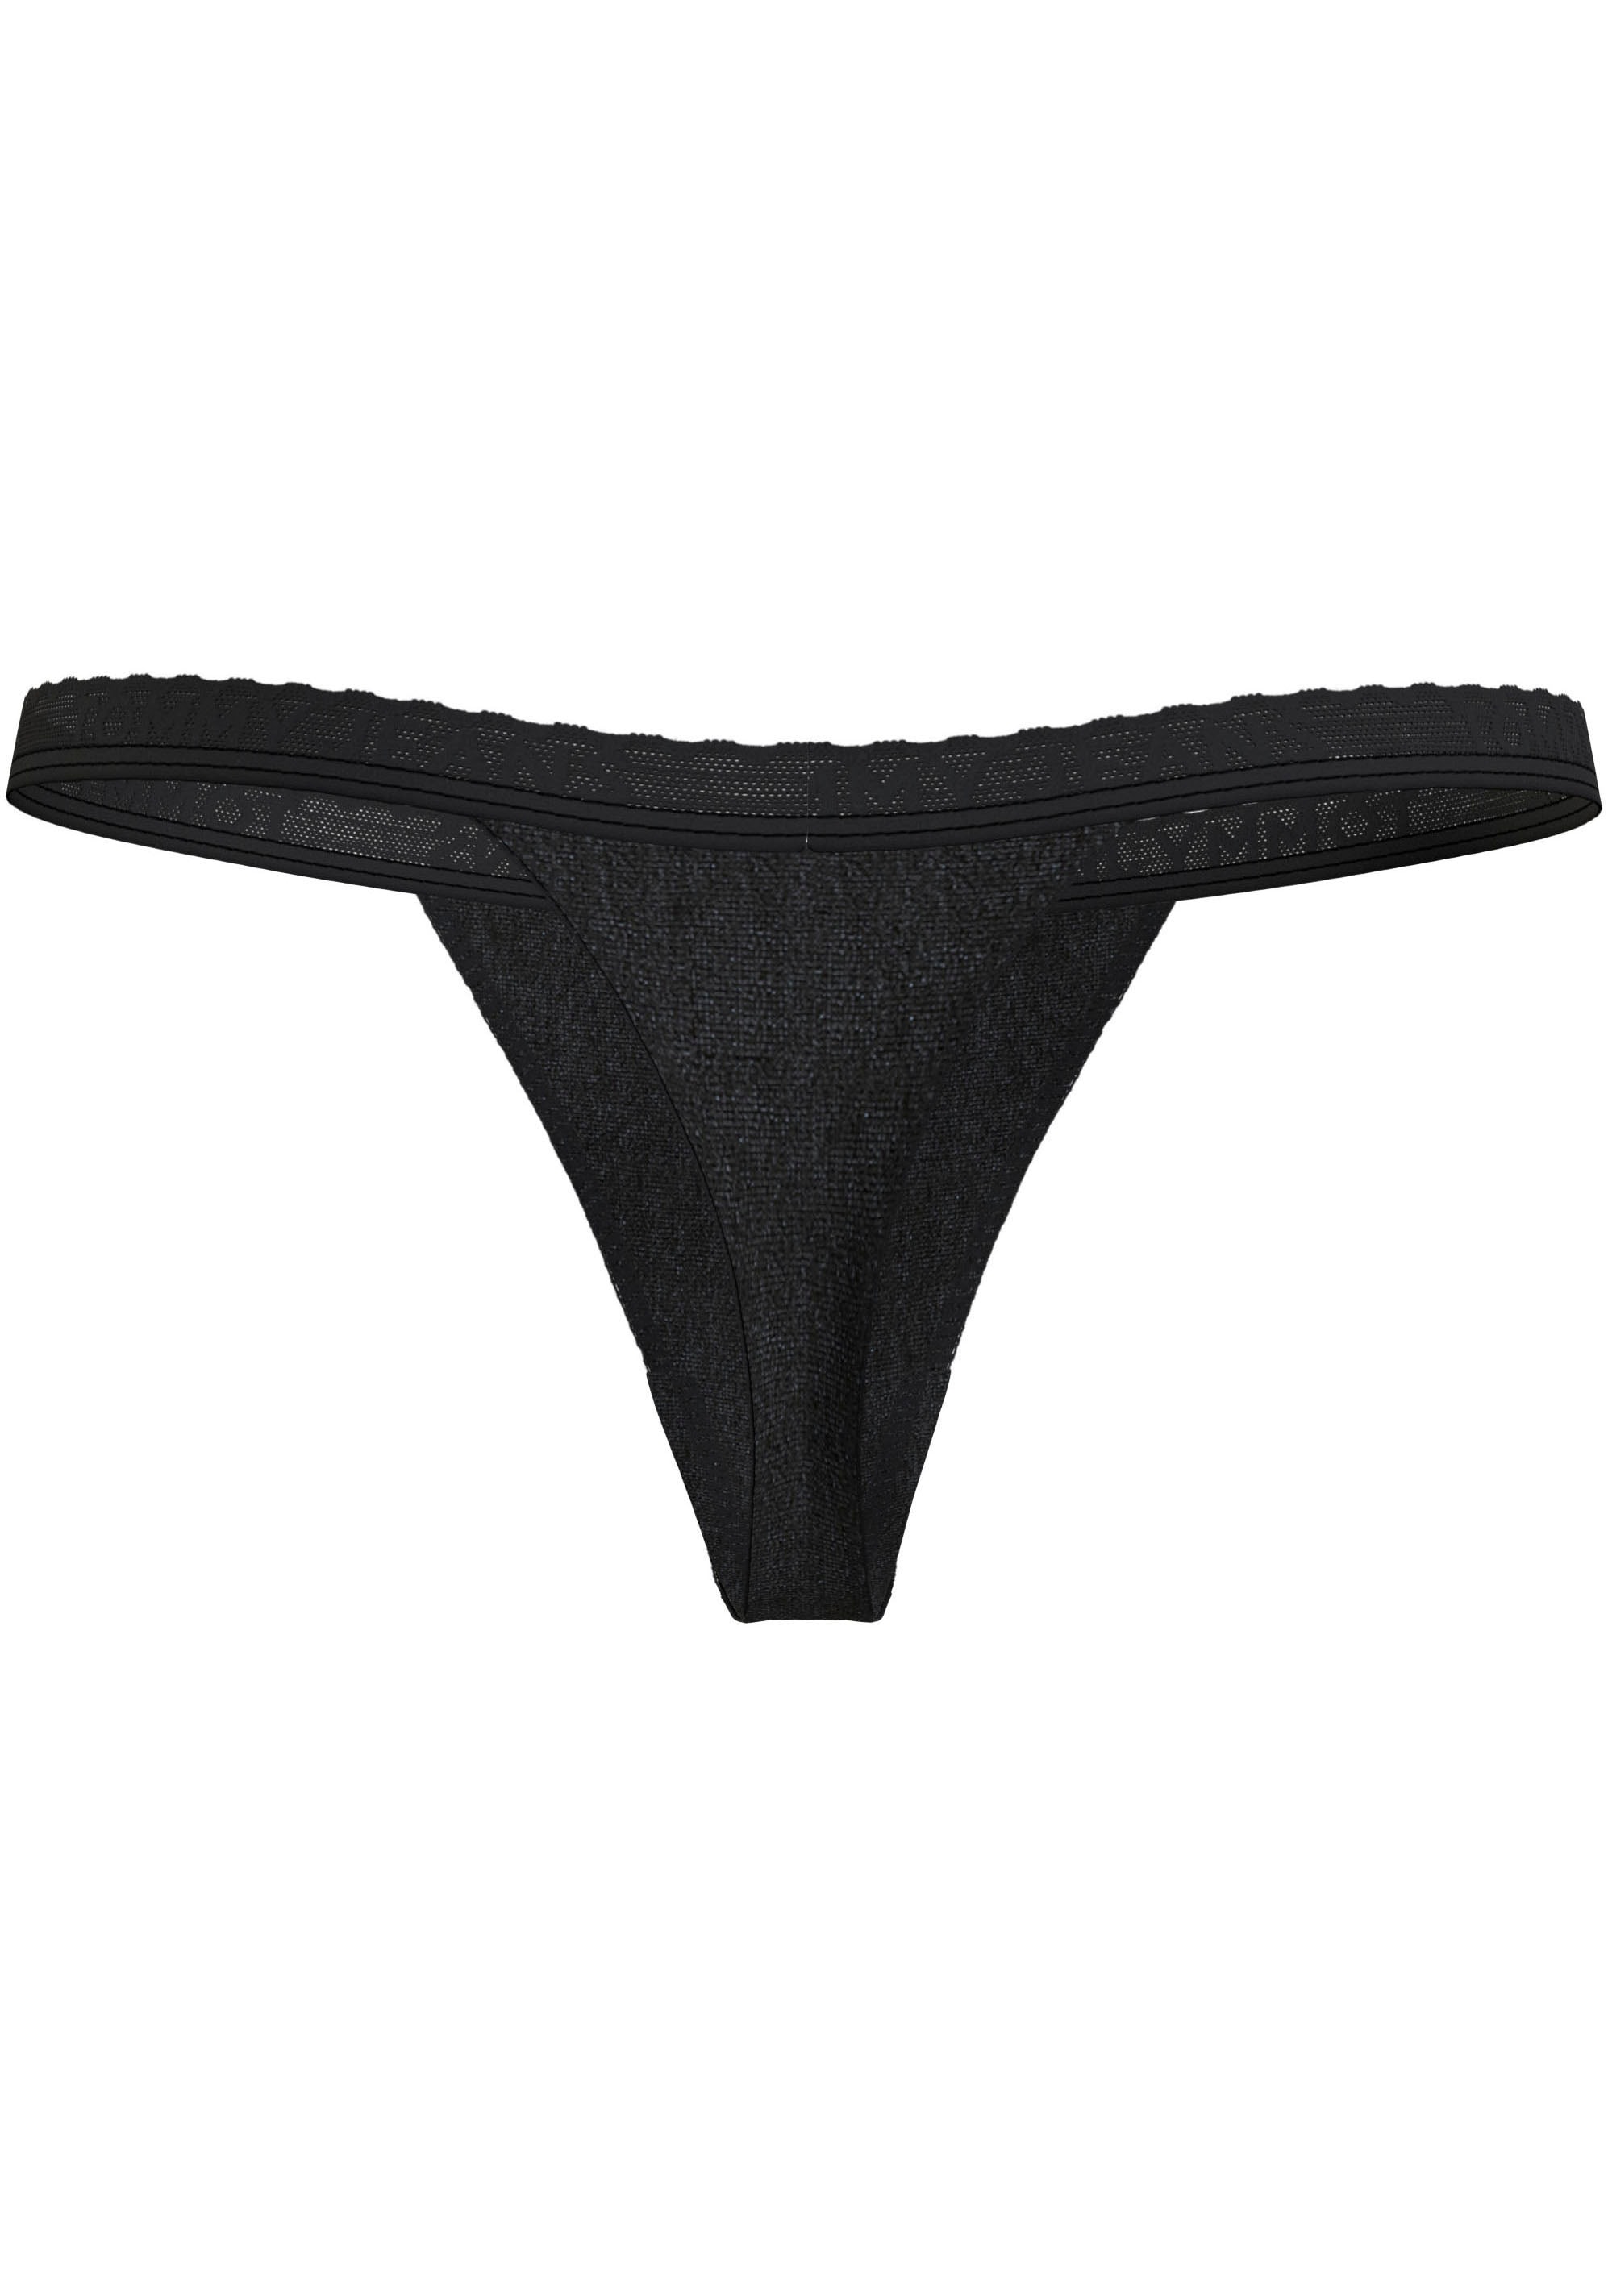 Tommy Hilfiger Underwear Tanga »3P TANGA THONG«, (Packung, 3 St., 3er), mit Tommy Jeans Lgoo-Schriftzug